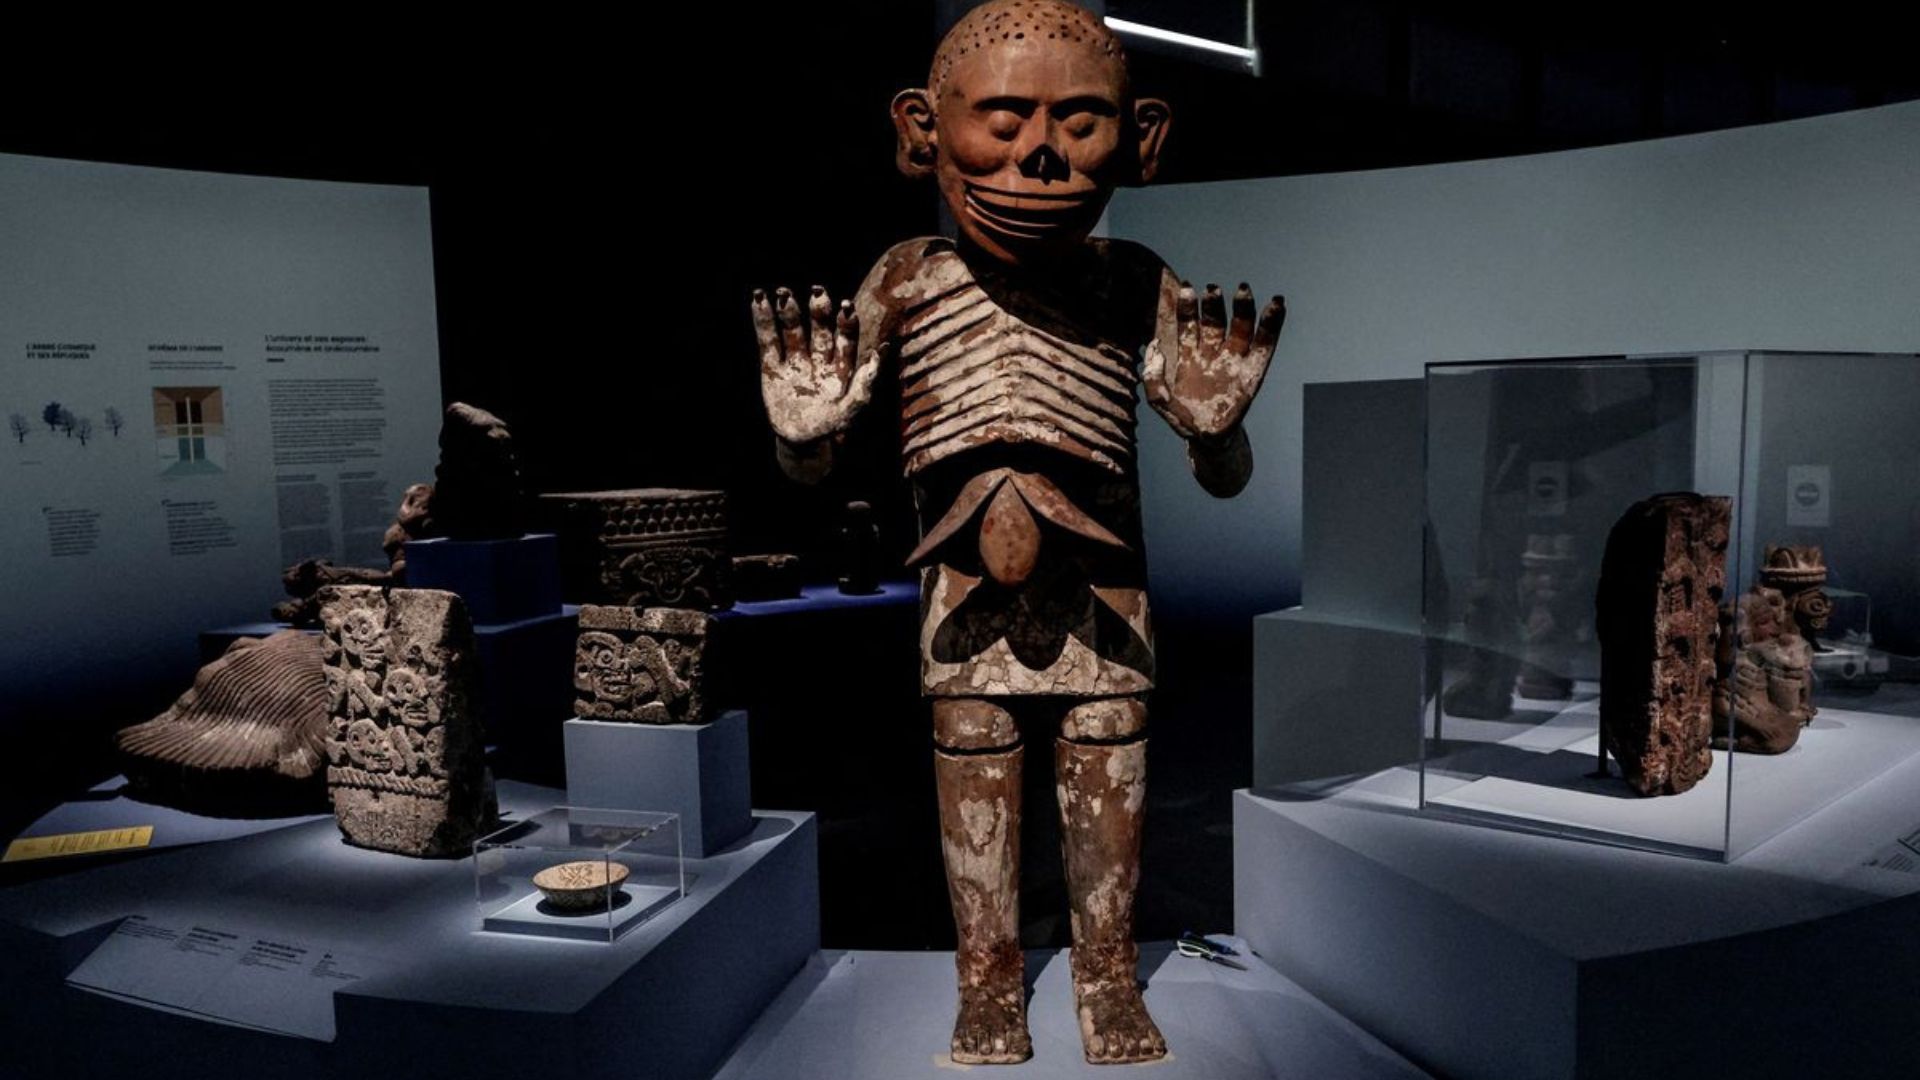 Mexica: the history of Mesoamerican archeology at the Musée du Quai Branly